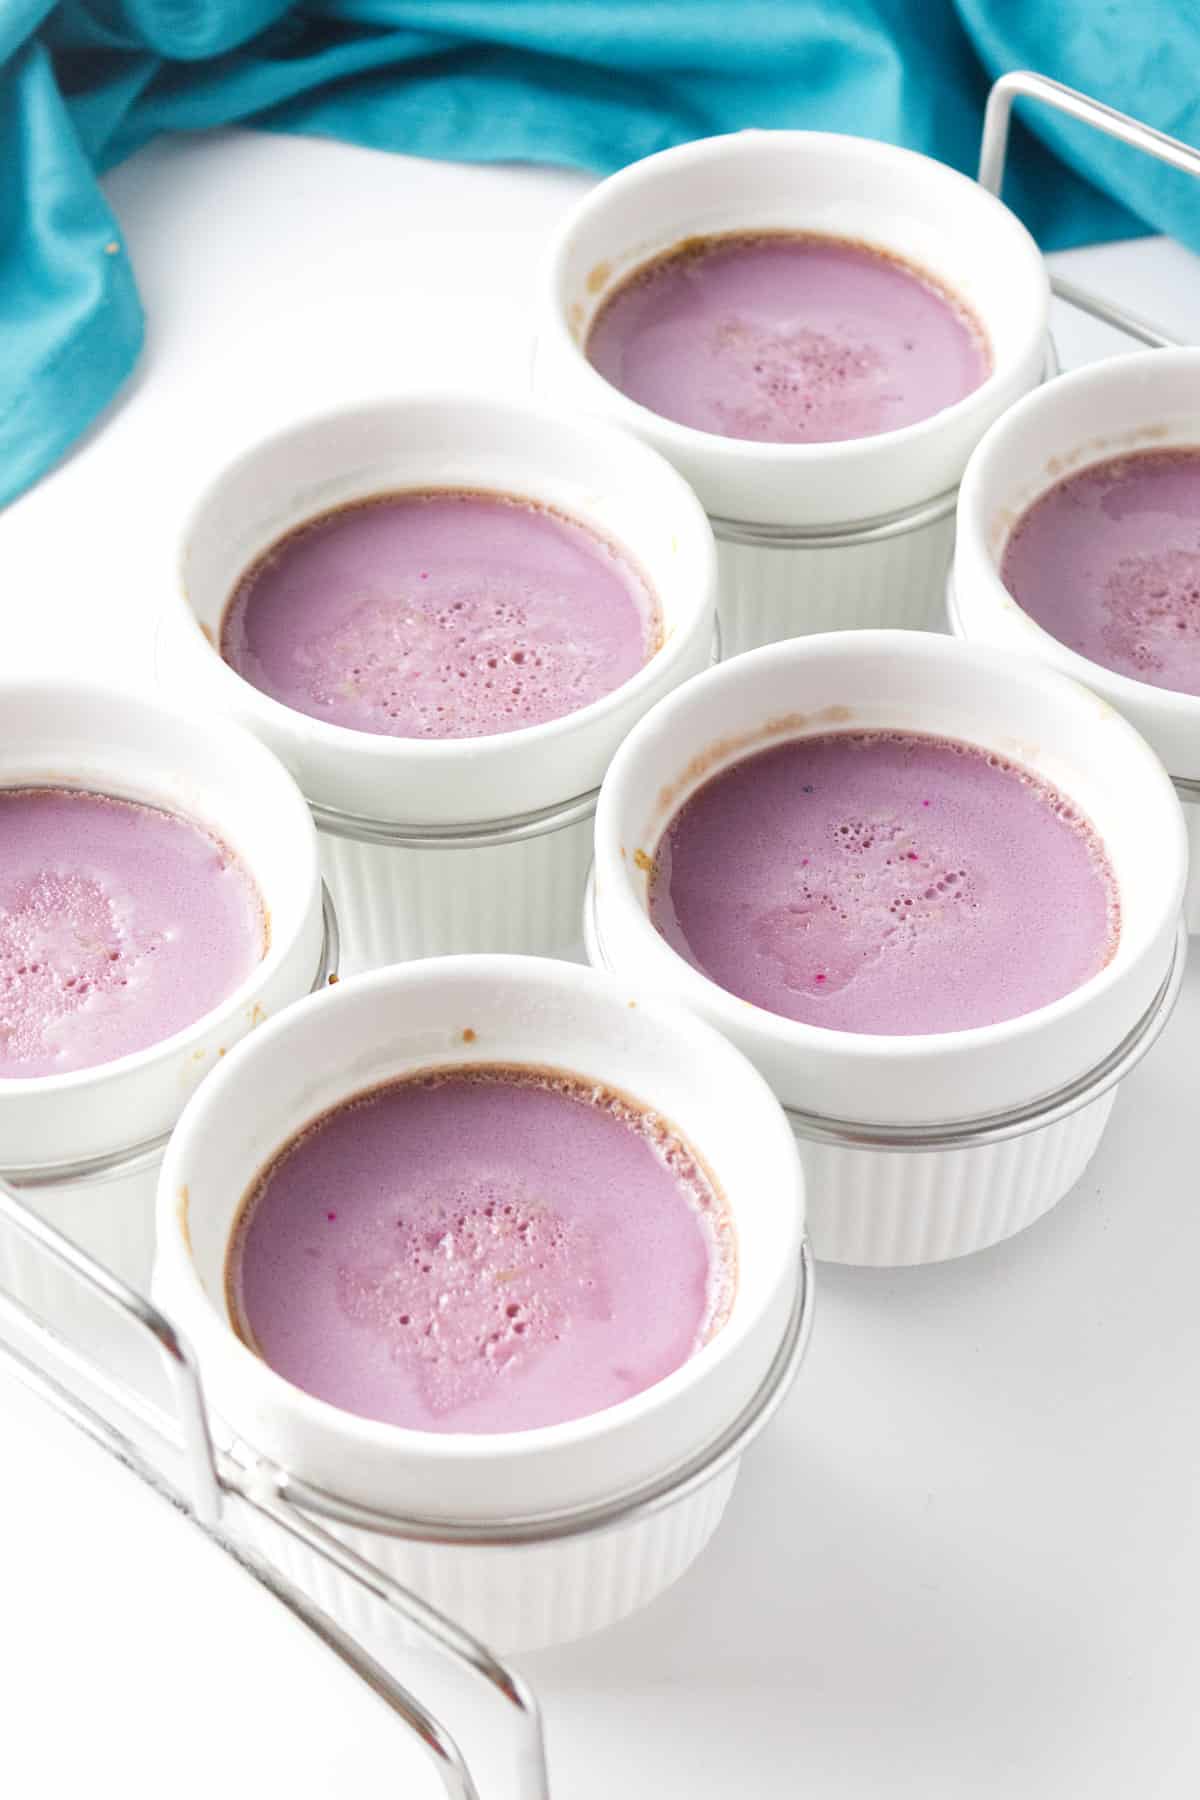 ube leche flan out from the oven.